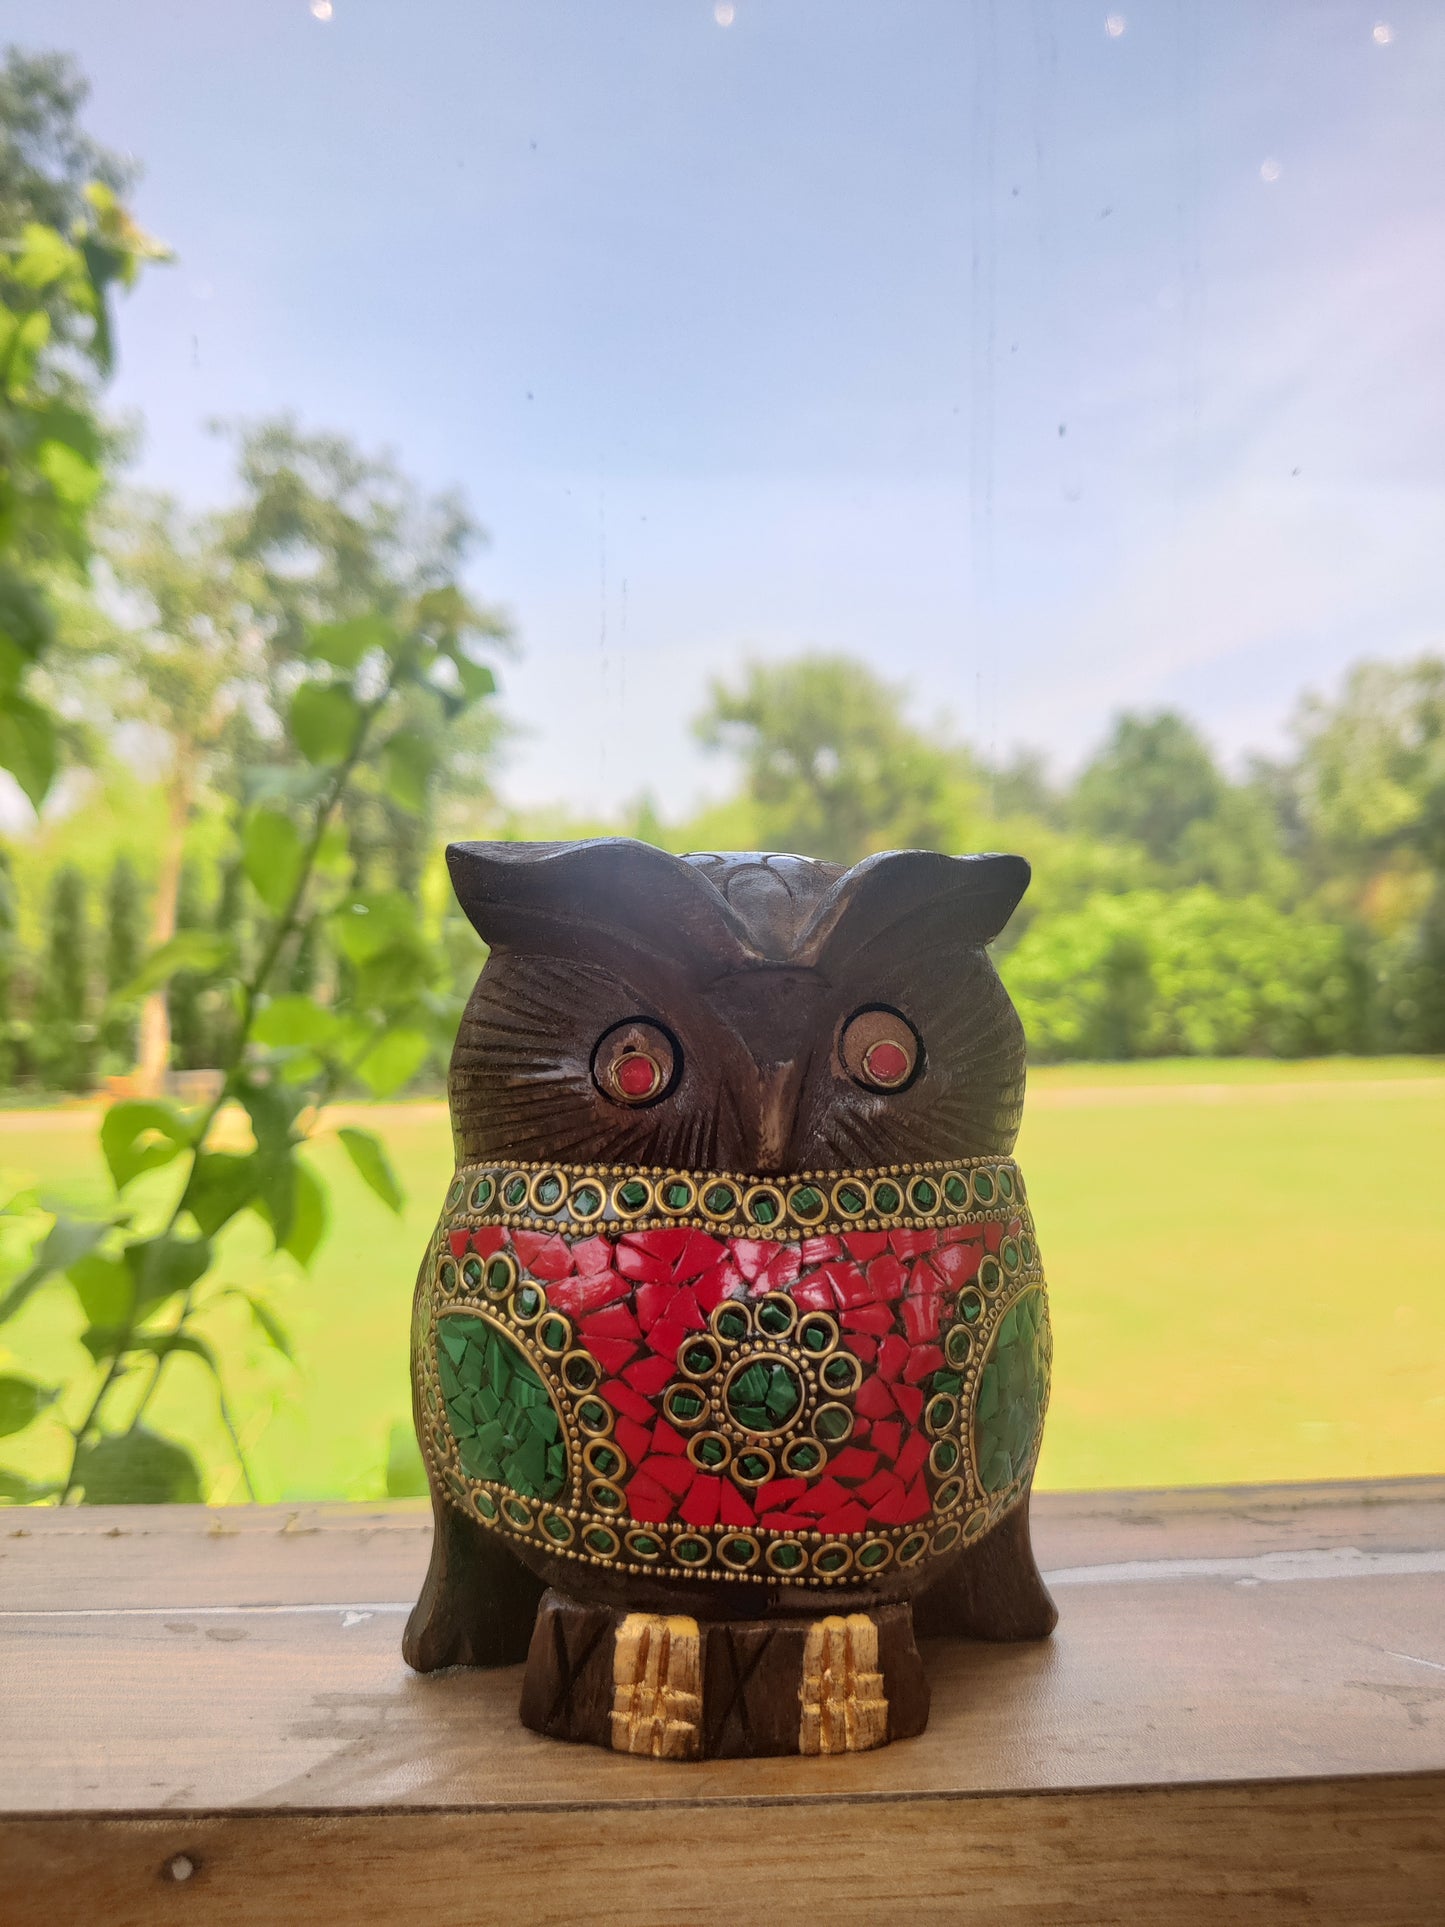 Wooden owl with stone work